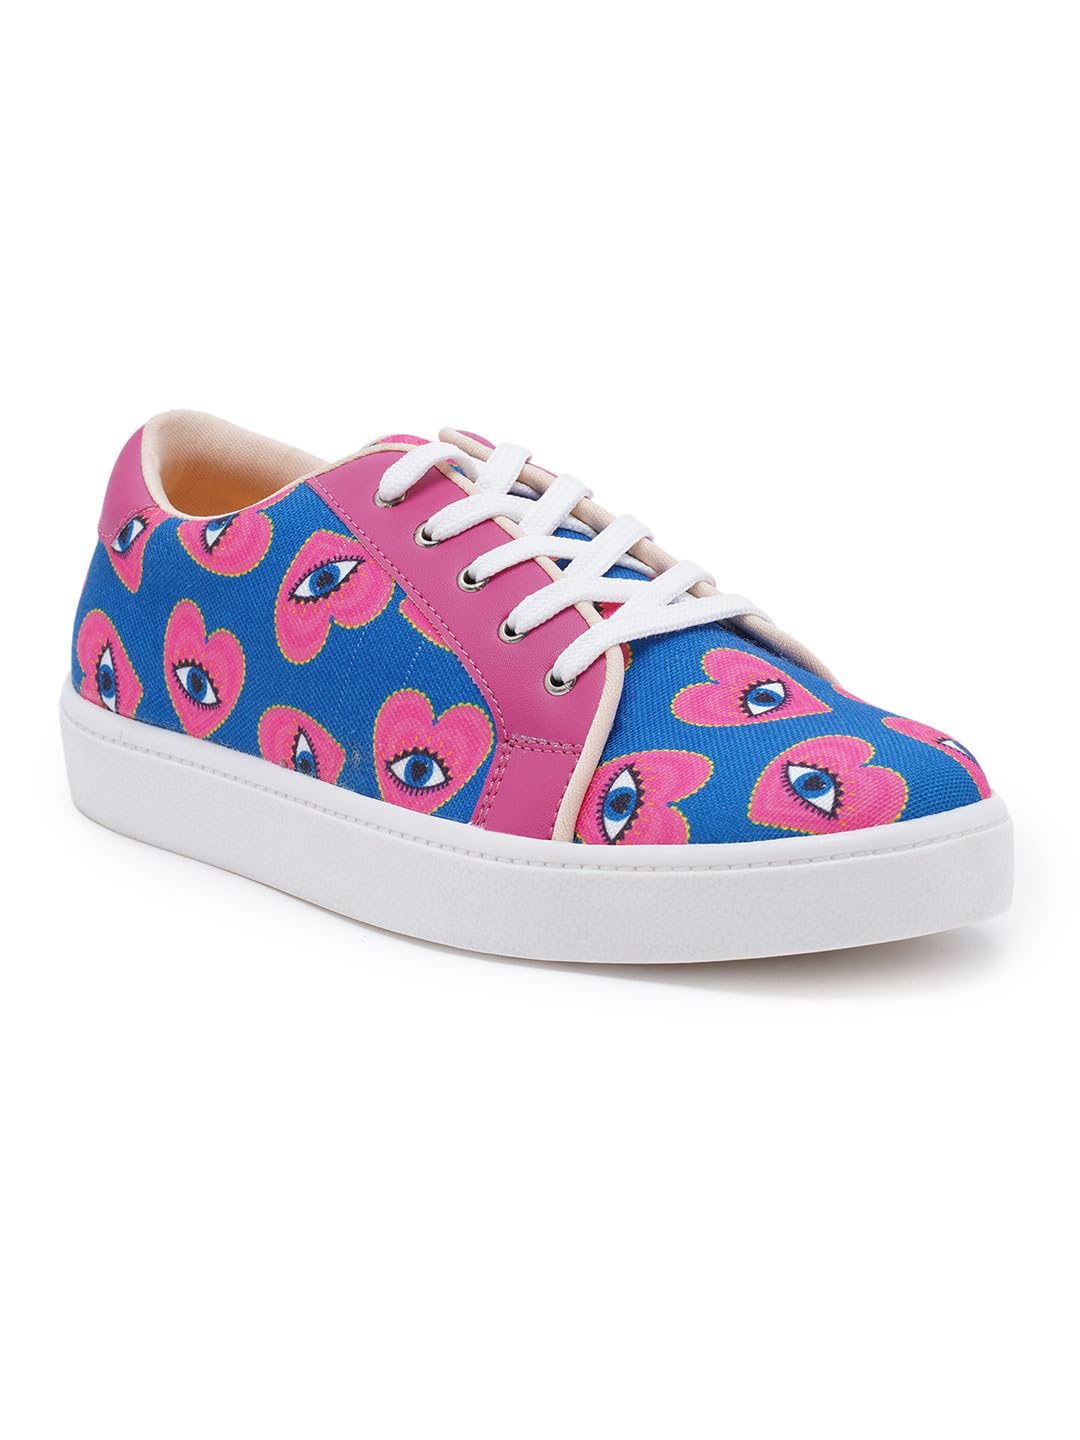 THE QUIRKY NAARI Mesmereyes Sneakers with Quirky Print | Blue